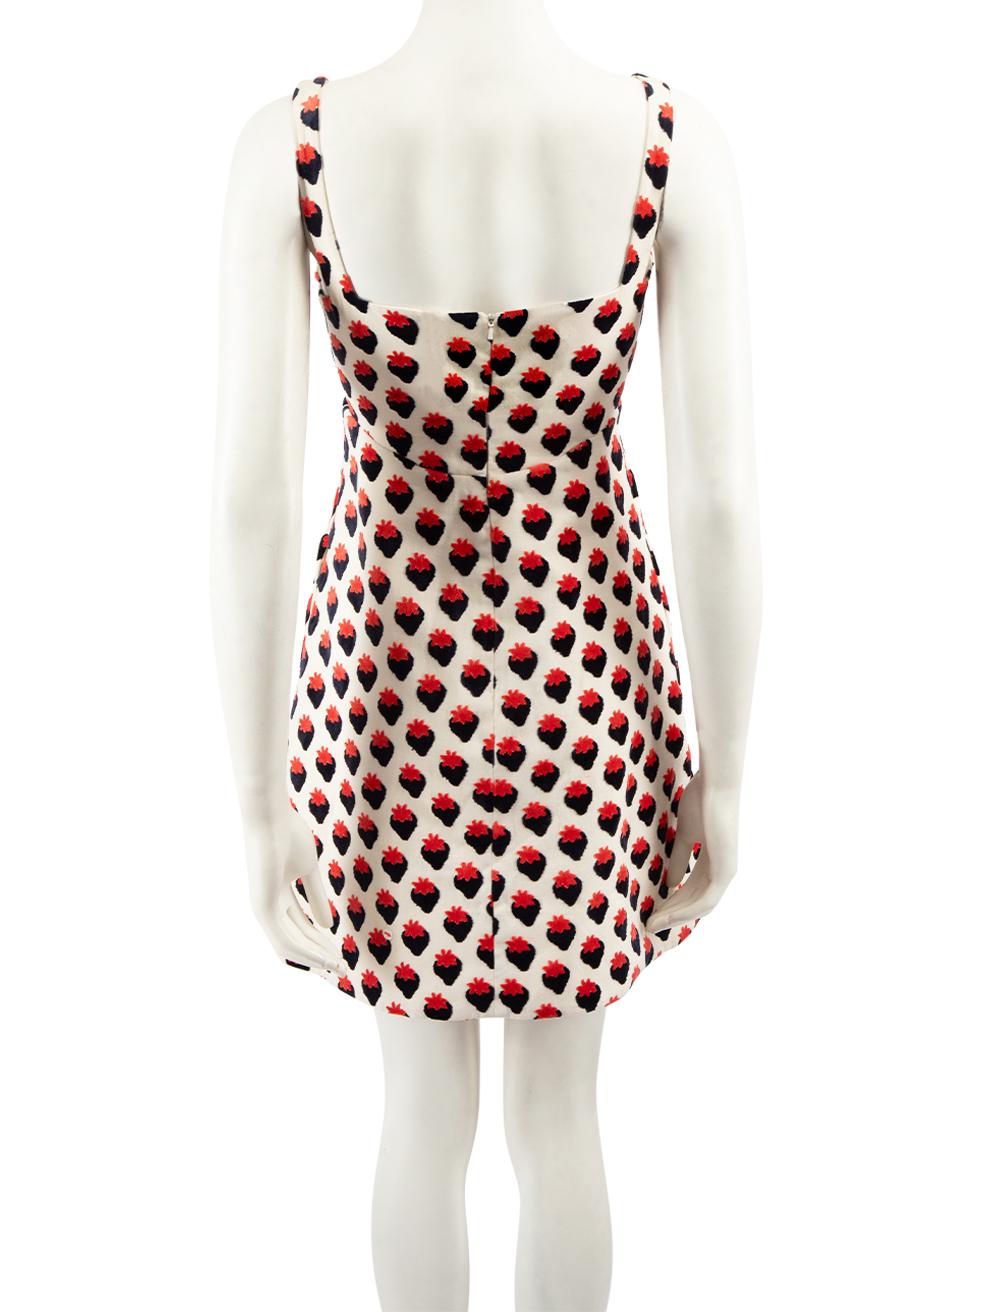 Victoria Beckham Strawberry Pattern Mini Dress Size XS In Good Condition For Sale In London, GB